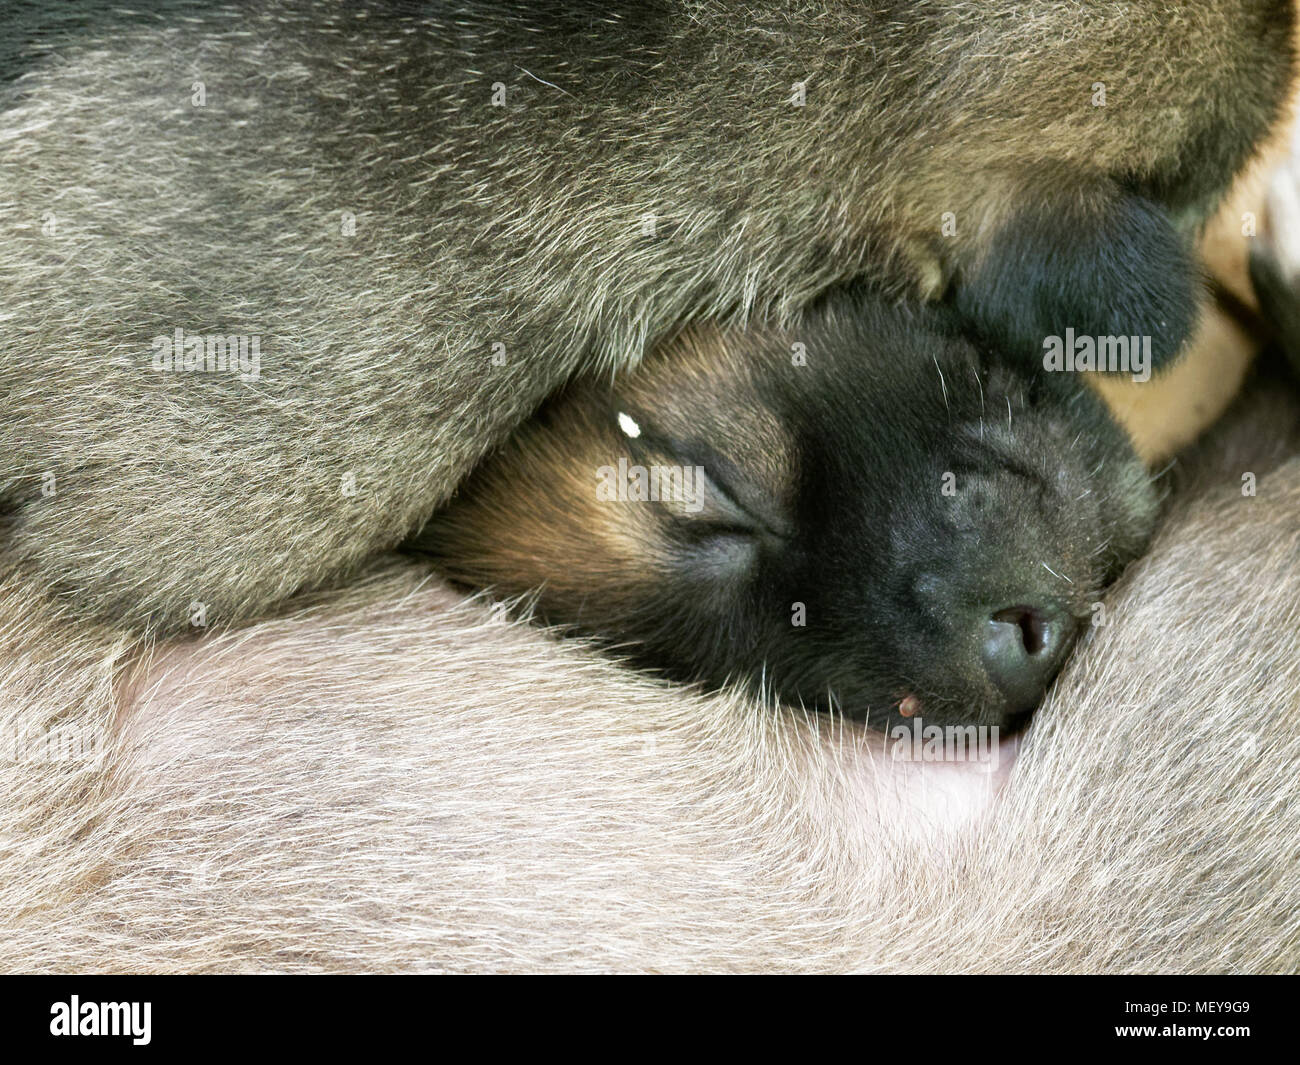 Close up shot of white, brown, and black stray newborn puppy face with closed eyes sleeping between its family by the street Stock Photo